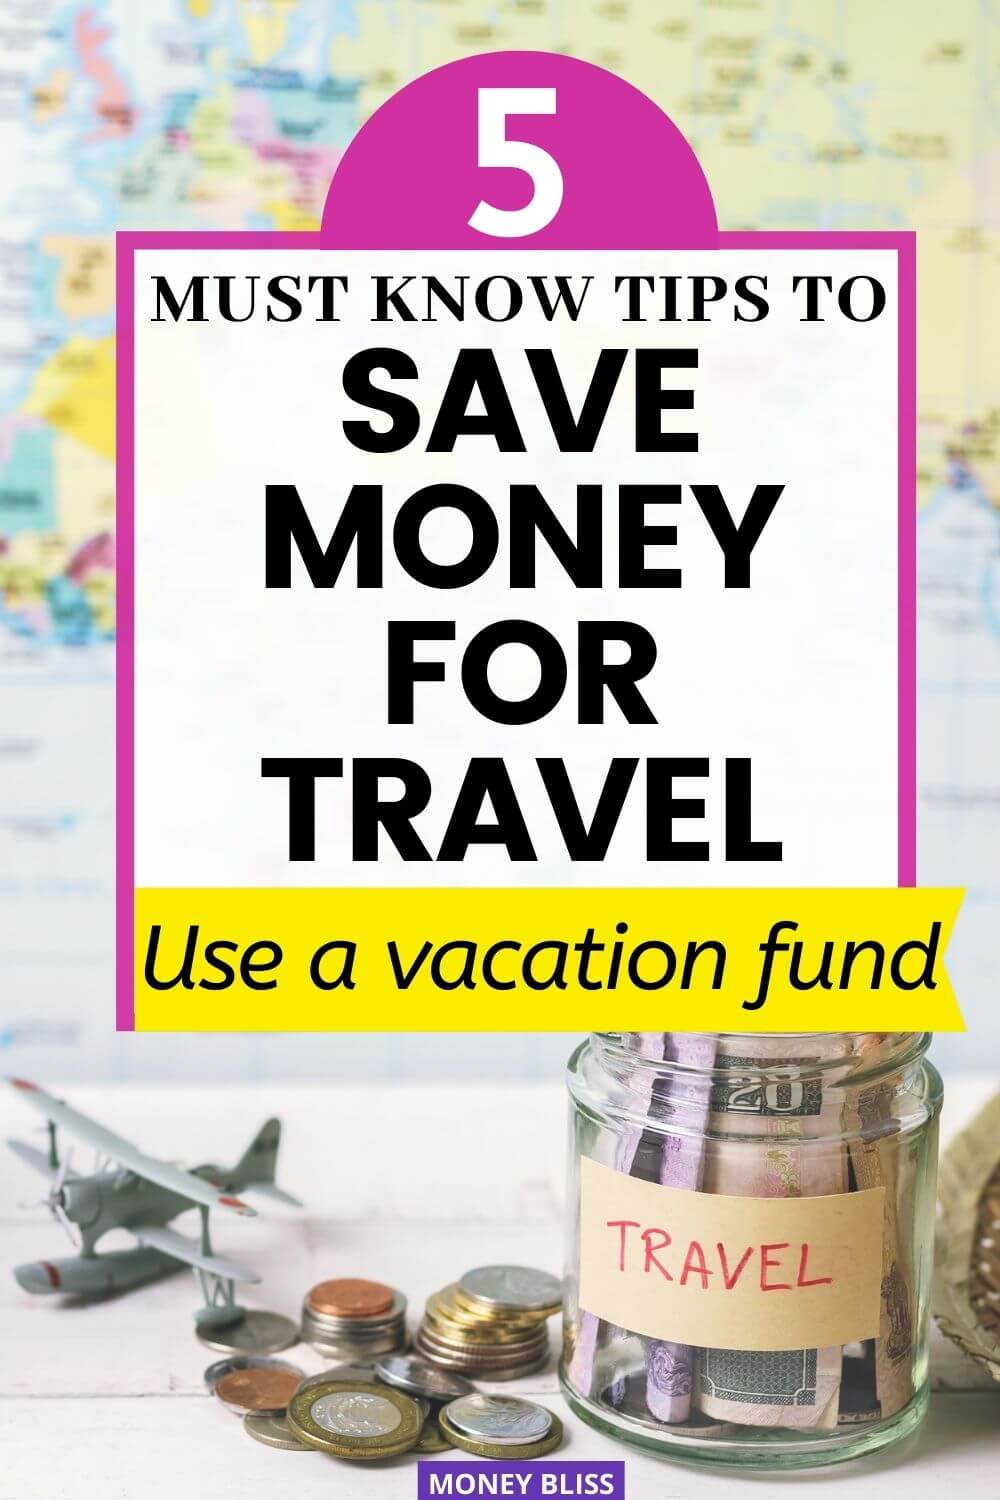 5 Tips to Save Money for Travel with a Vacation Fund